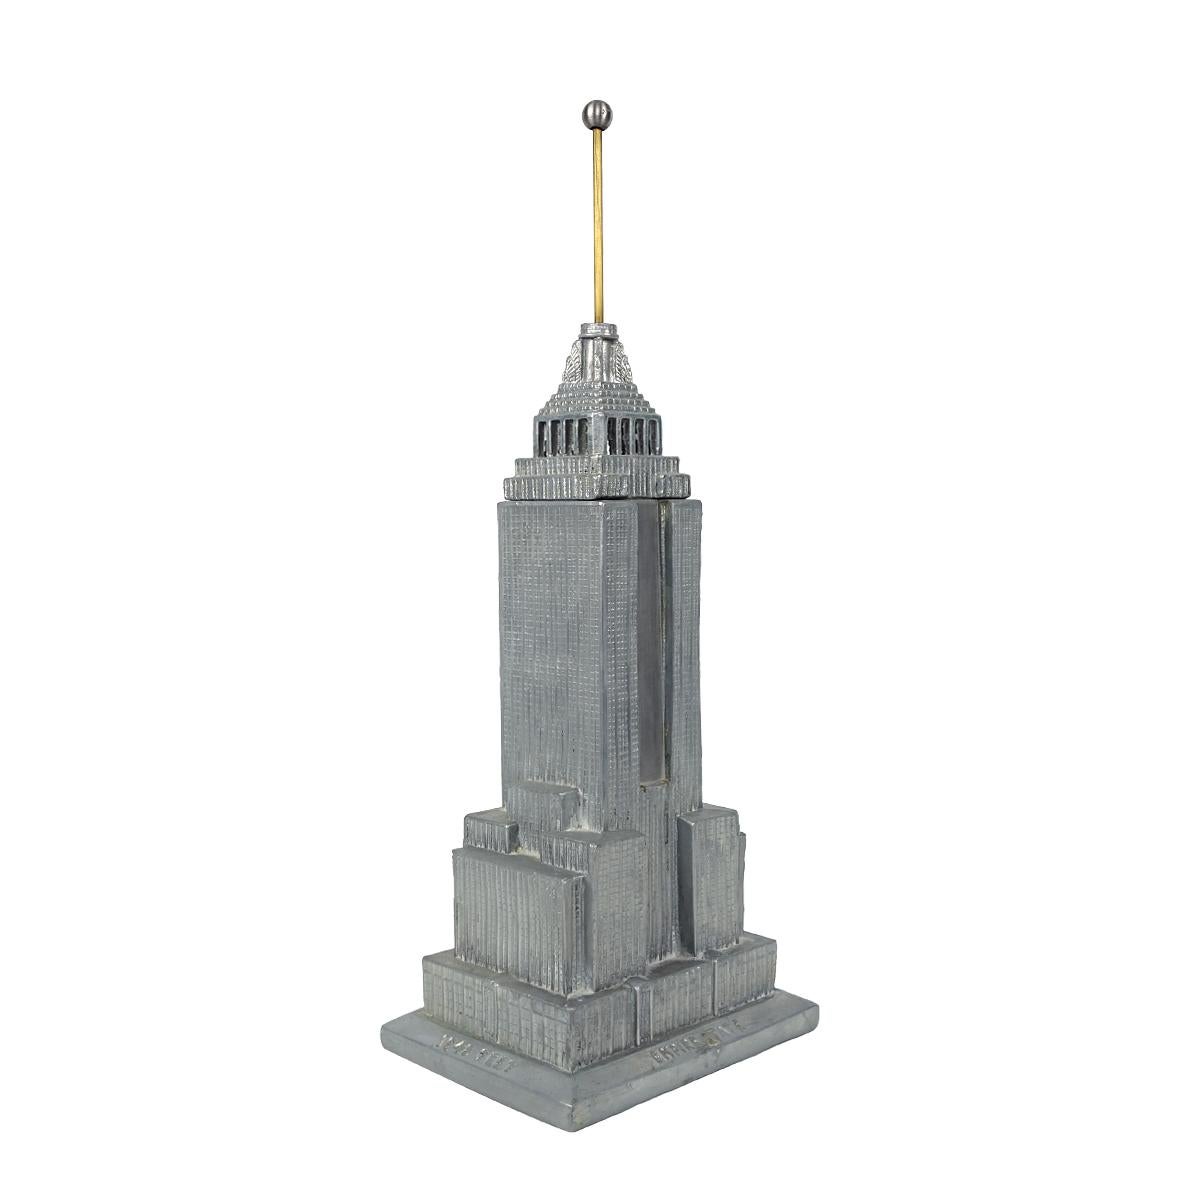 Wonderful table lamp made by Sarsaparilla Deco Designed, probably somewhere in the 1970s. Inscripition: “World’s tallest Empire State New York 1848 Feet”